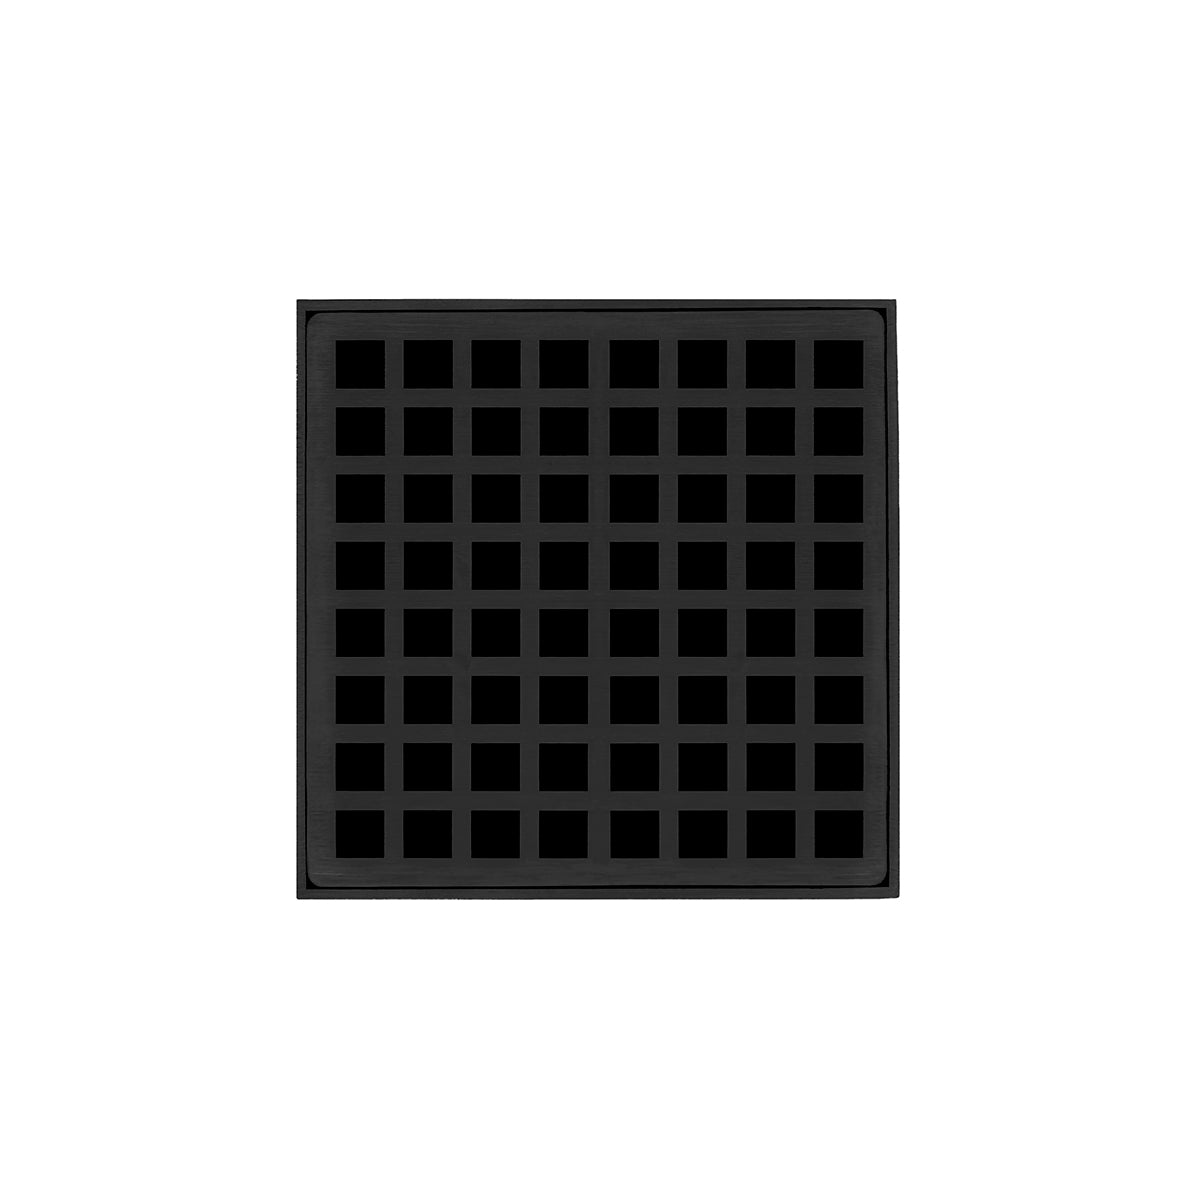 Infinity Drain 5" x 5" QD 5 Premium Center Drain Kit with Squares Pattern Decorative Plate with ABS Drain Body, 2" Outlet